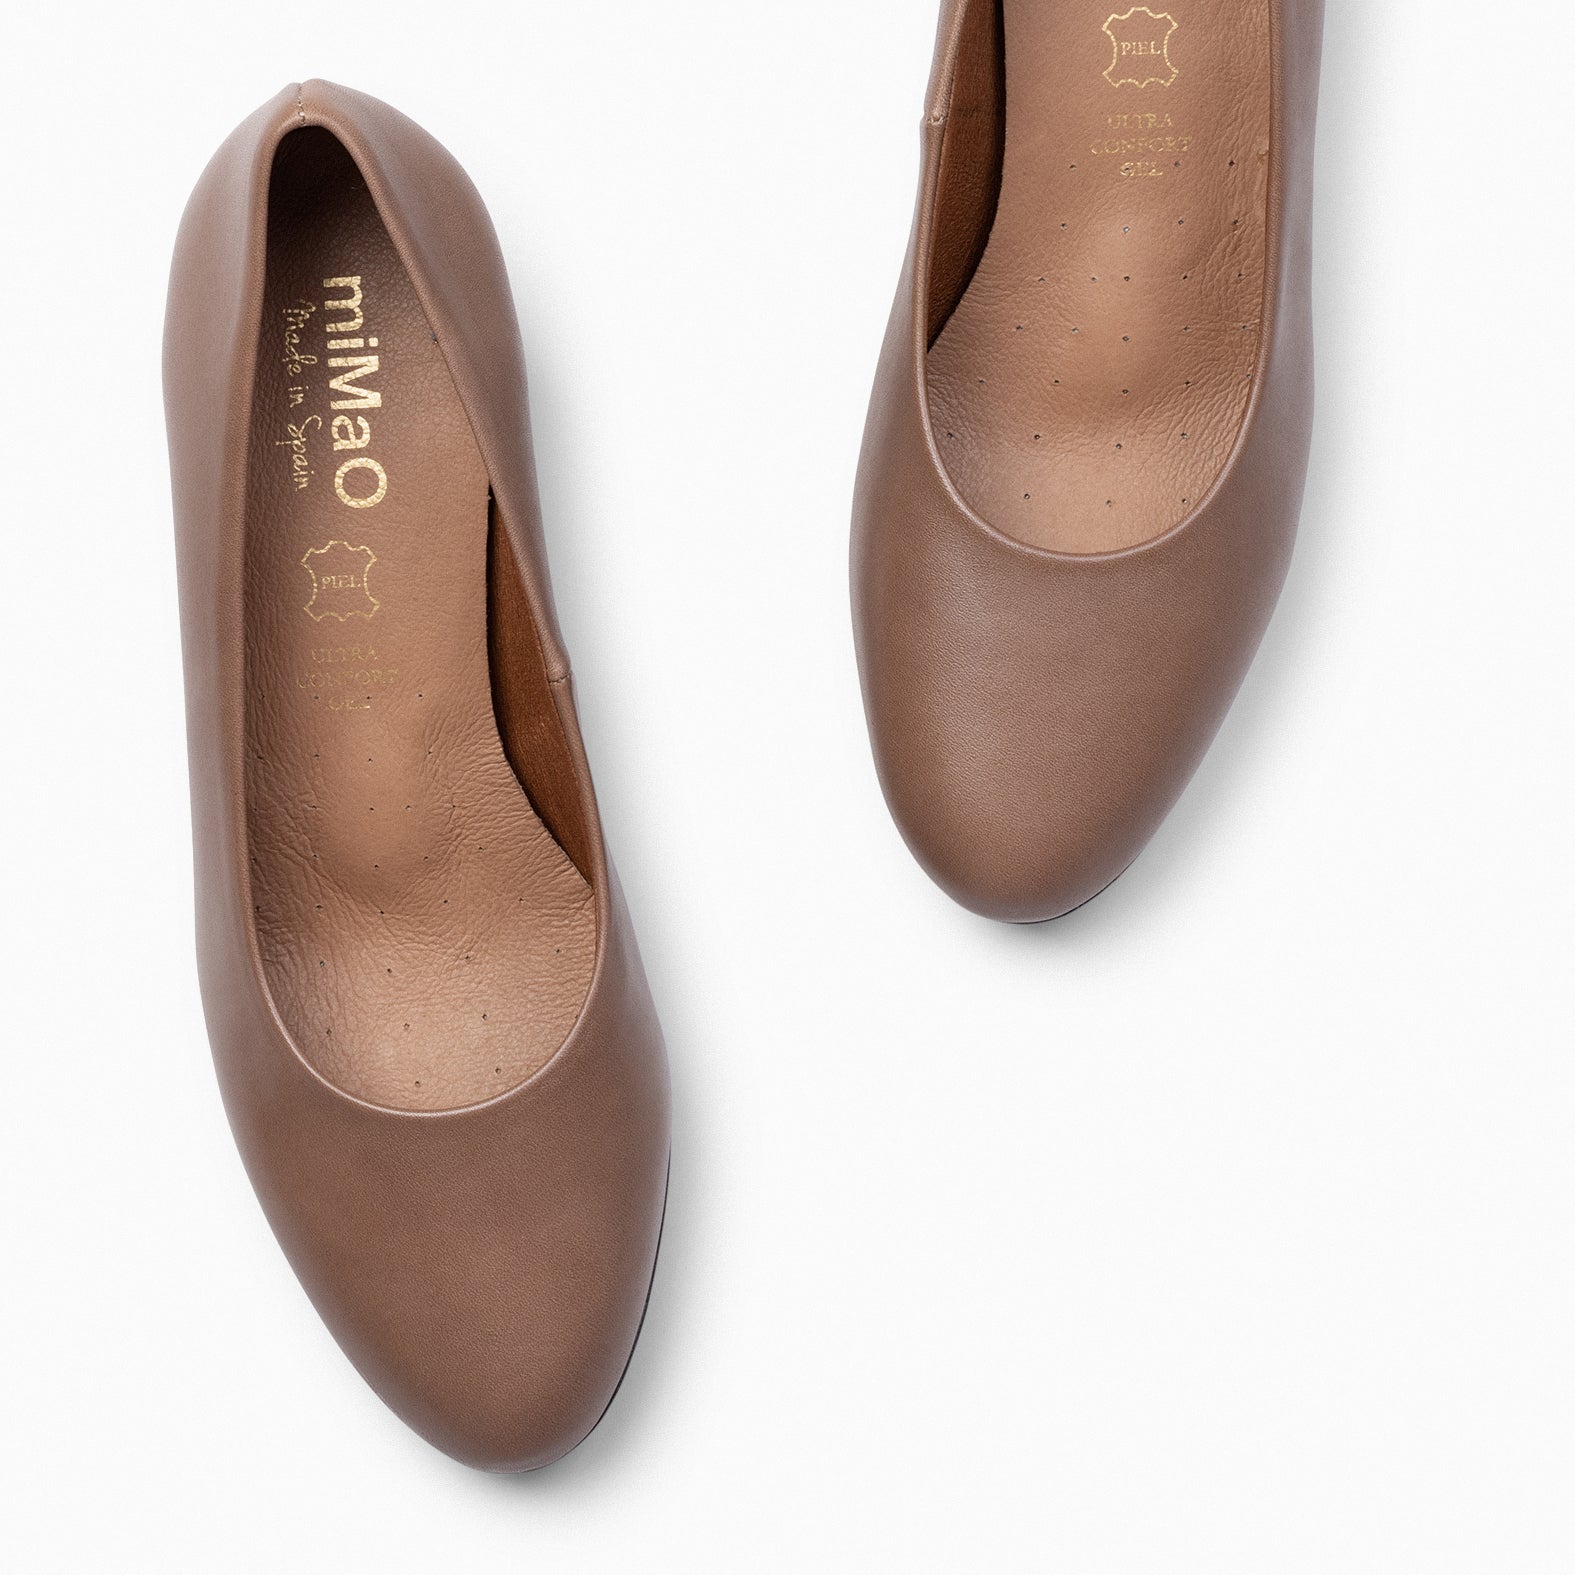 FLIGHT S – TAUPE low heels and platform shoes